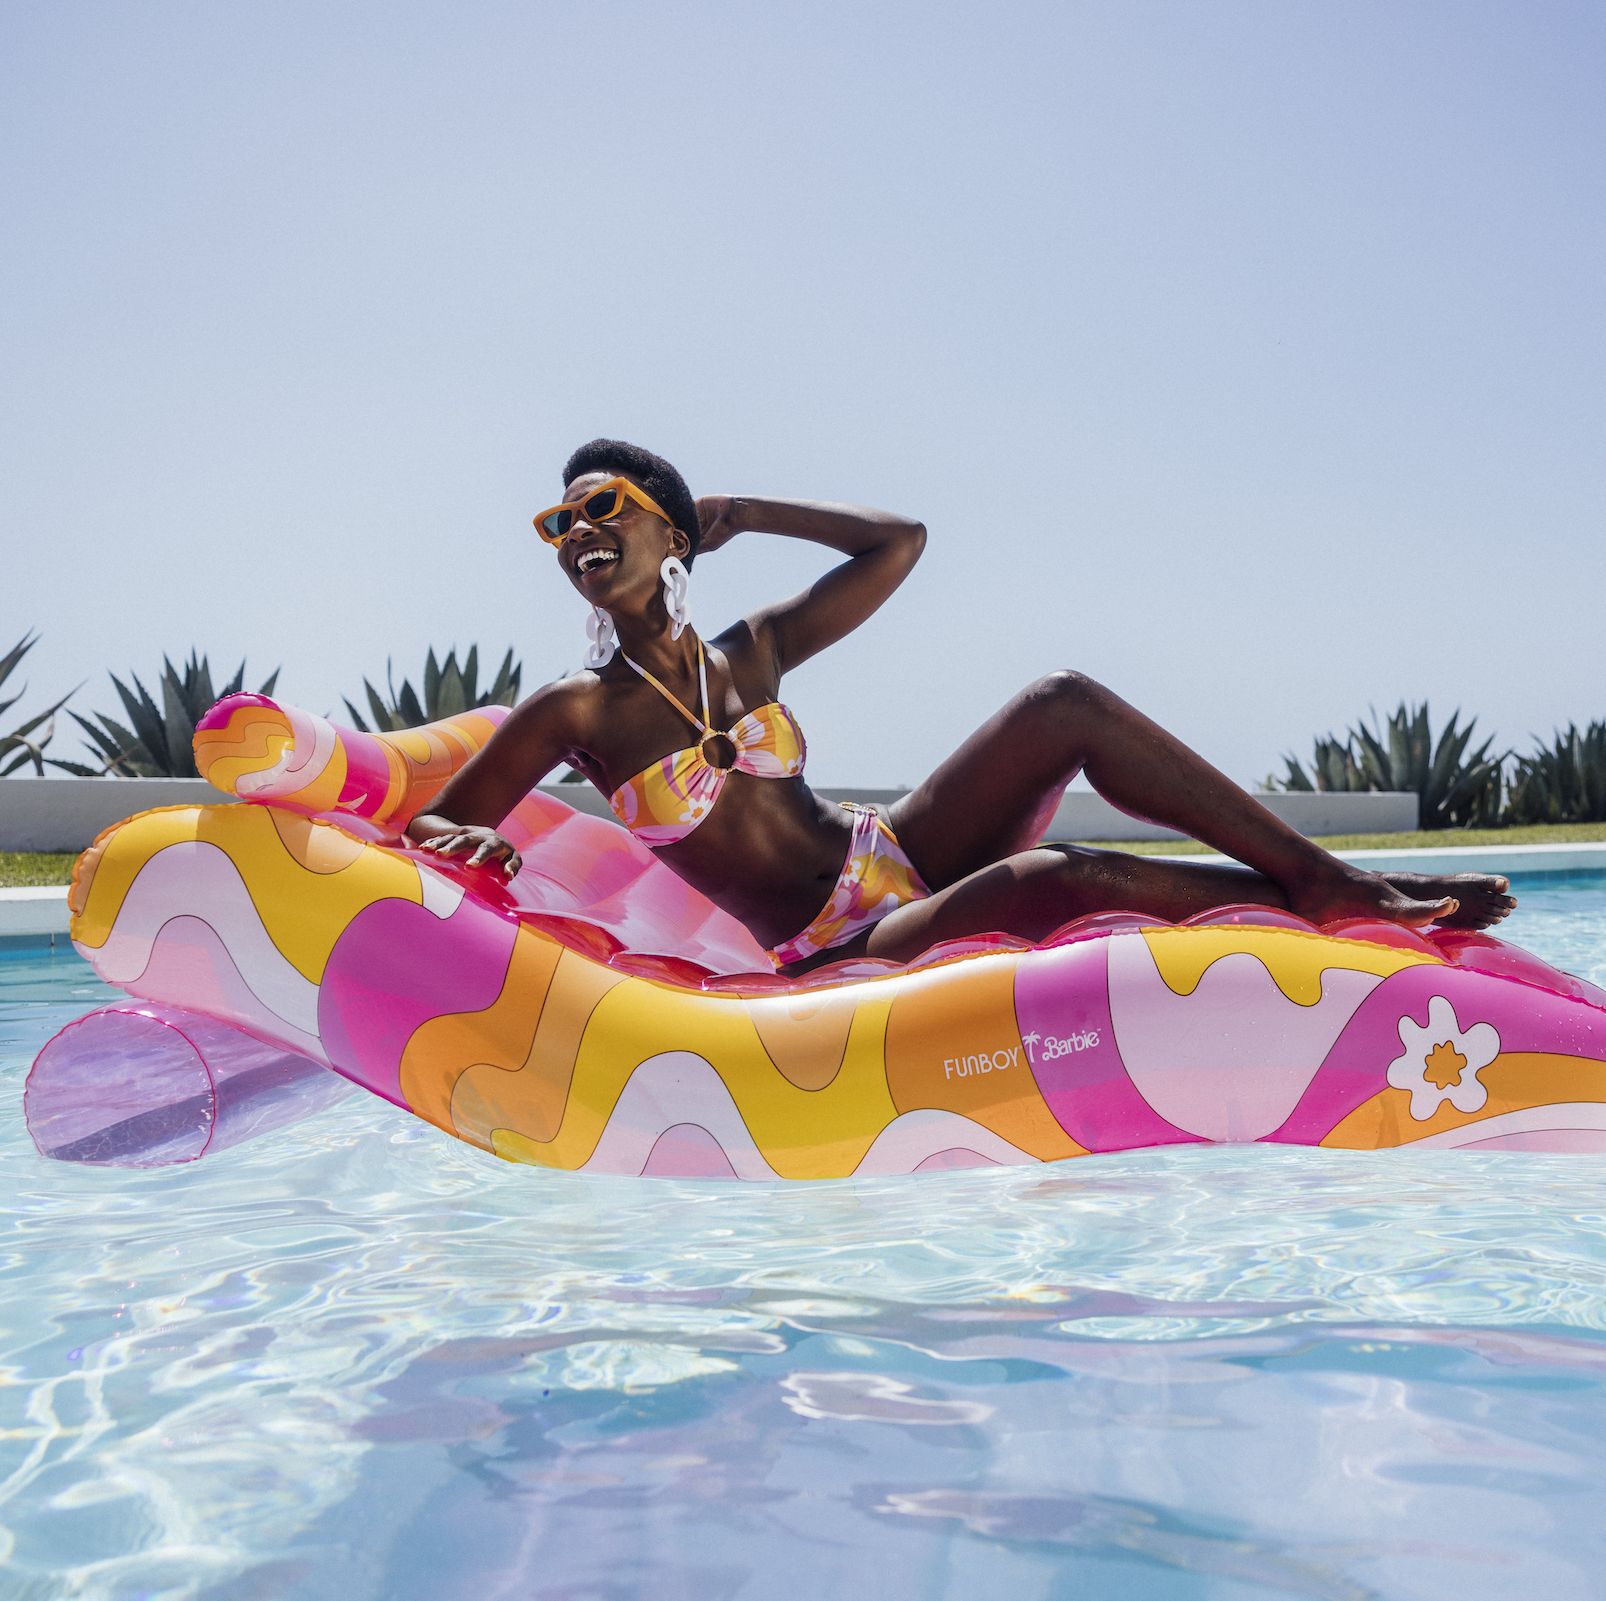 Attn: This Barbie Swim Collection Is Your Childhood Dream Come True